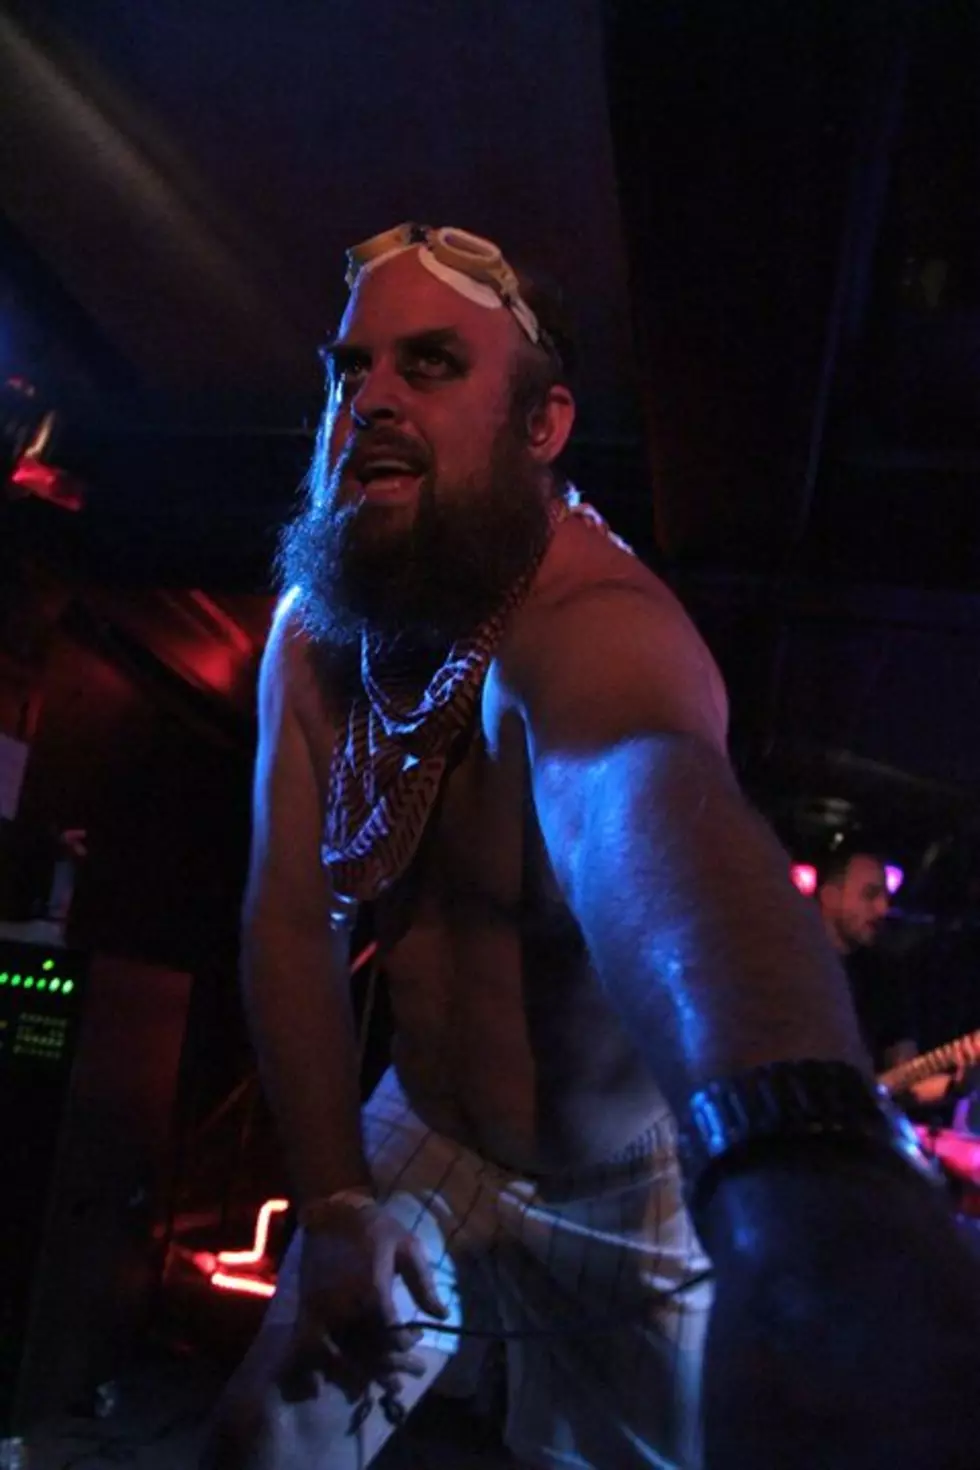 Les Savy Fav played Subterranean w/ Big Science (pics), and Green Music Fest (pics)